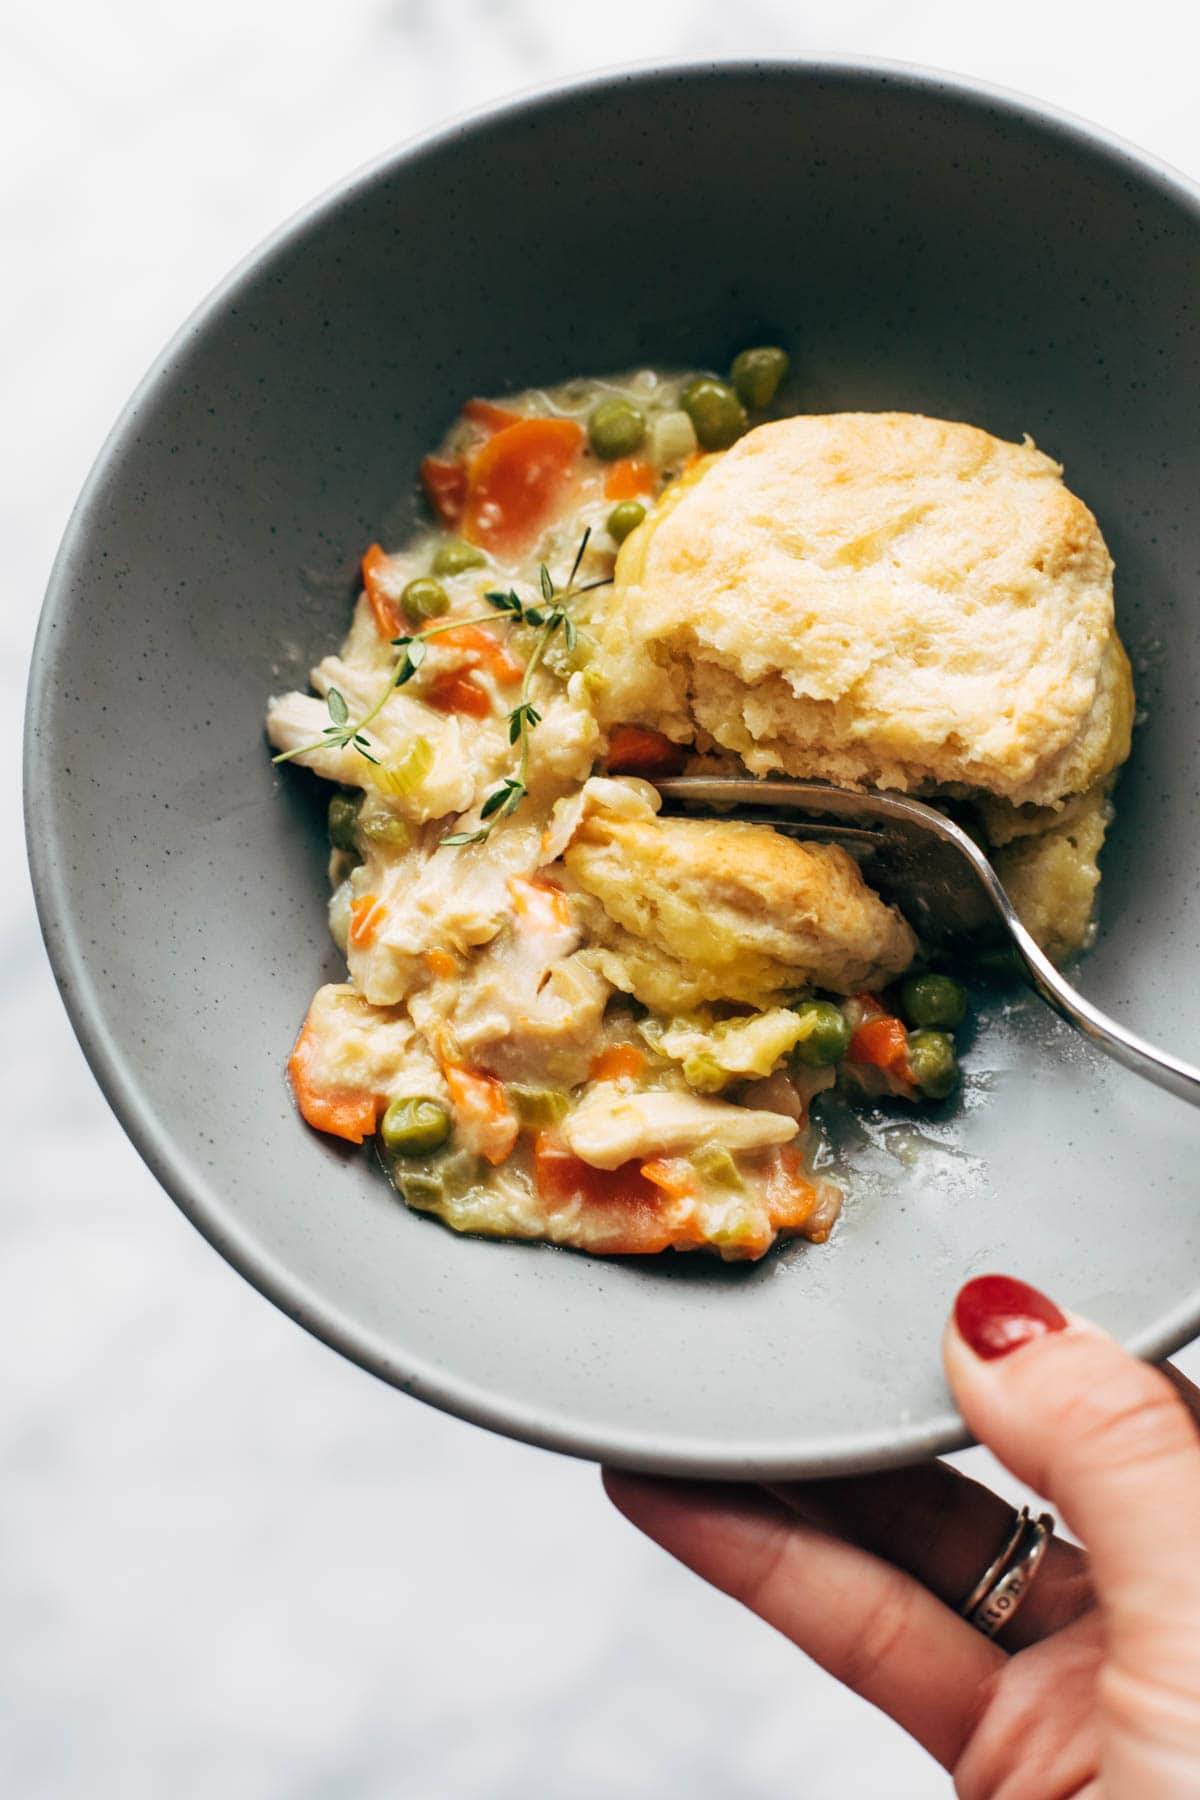 Bowl of chicken pot pie with a biscuit.